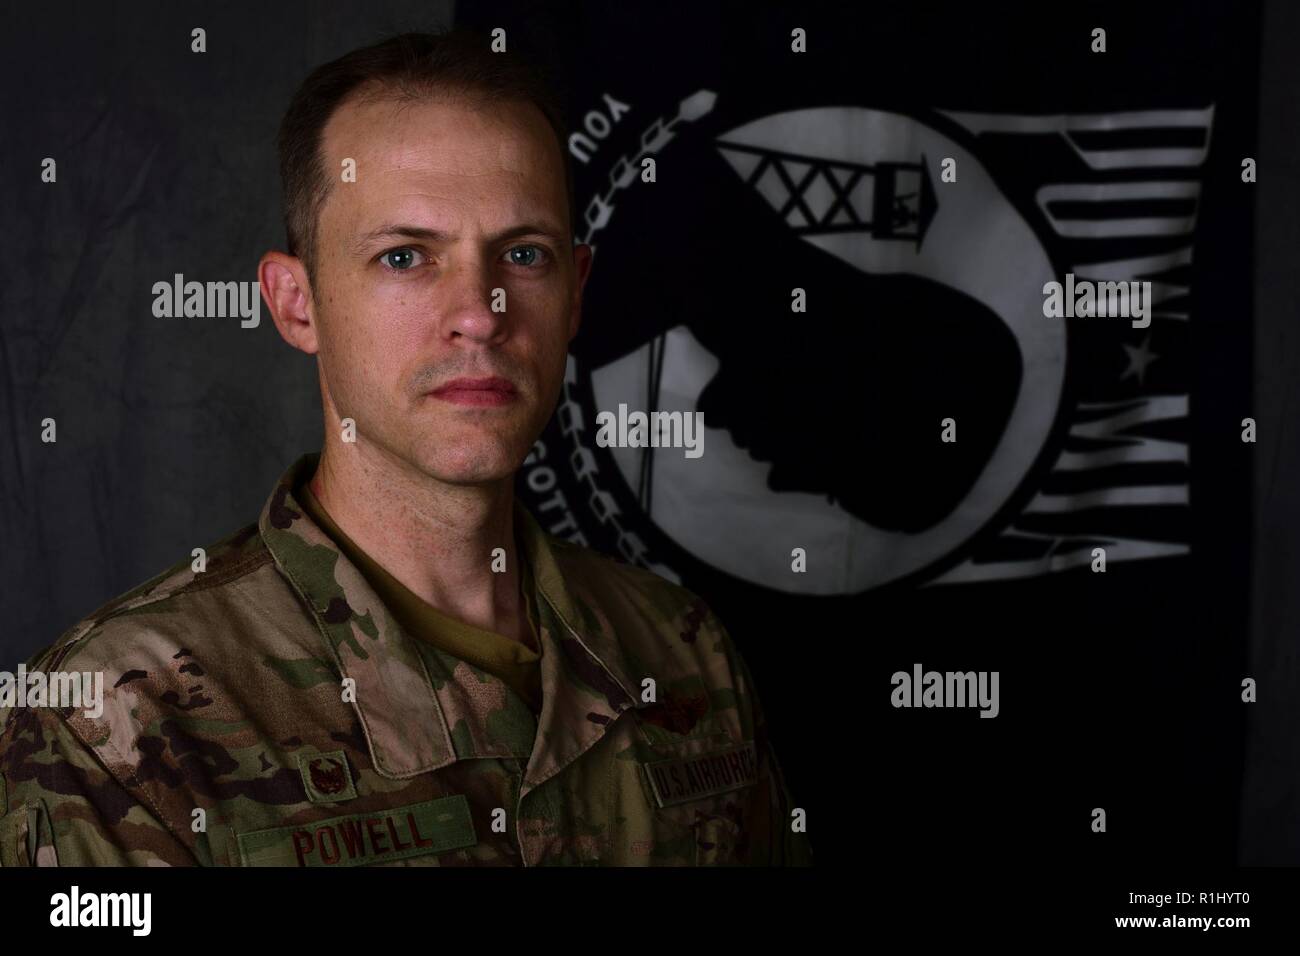 U.S. Air Force Lt. Col. Nathan Powell, 387th Air Expeditionary Squadron commander, poses for a portrait at an undisclosed location in Southwest Asia, Sept. 21, 2018. National POW/MIA Recognition Day is held each year on Sept. 21. There are currently more than 82,000 Americans missing from past conflicts dating back to World War II. Stock Photo